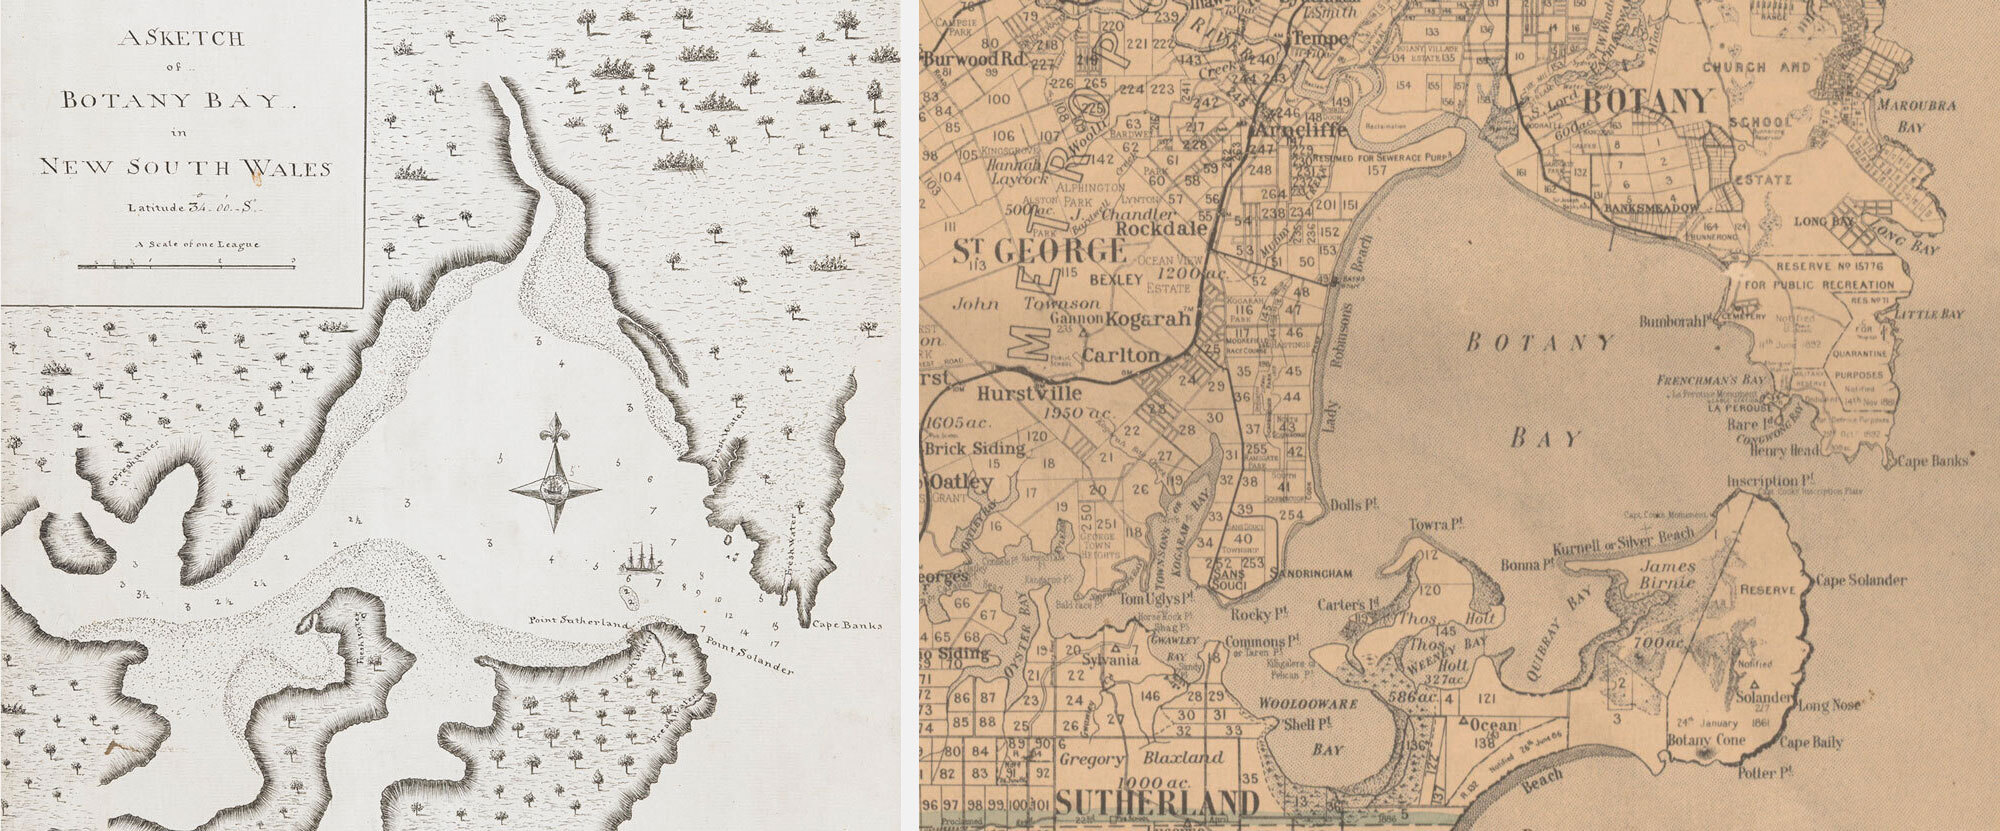 Map 1: Section of a map of the County of Cumberland, New South Wales, 1894  Map 2: Chart of Botany Bay, 1770, by Lieutenant James Cook